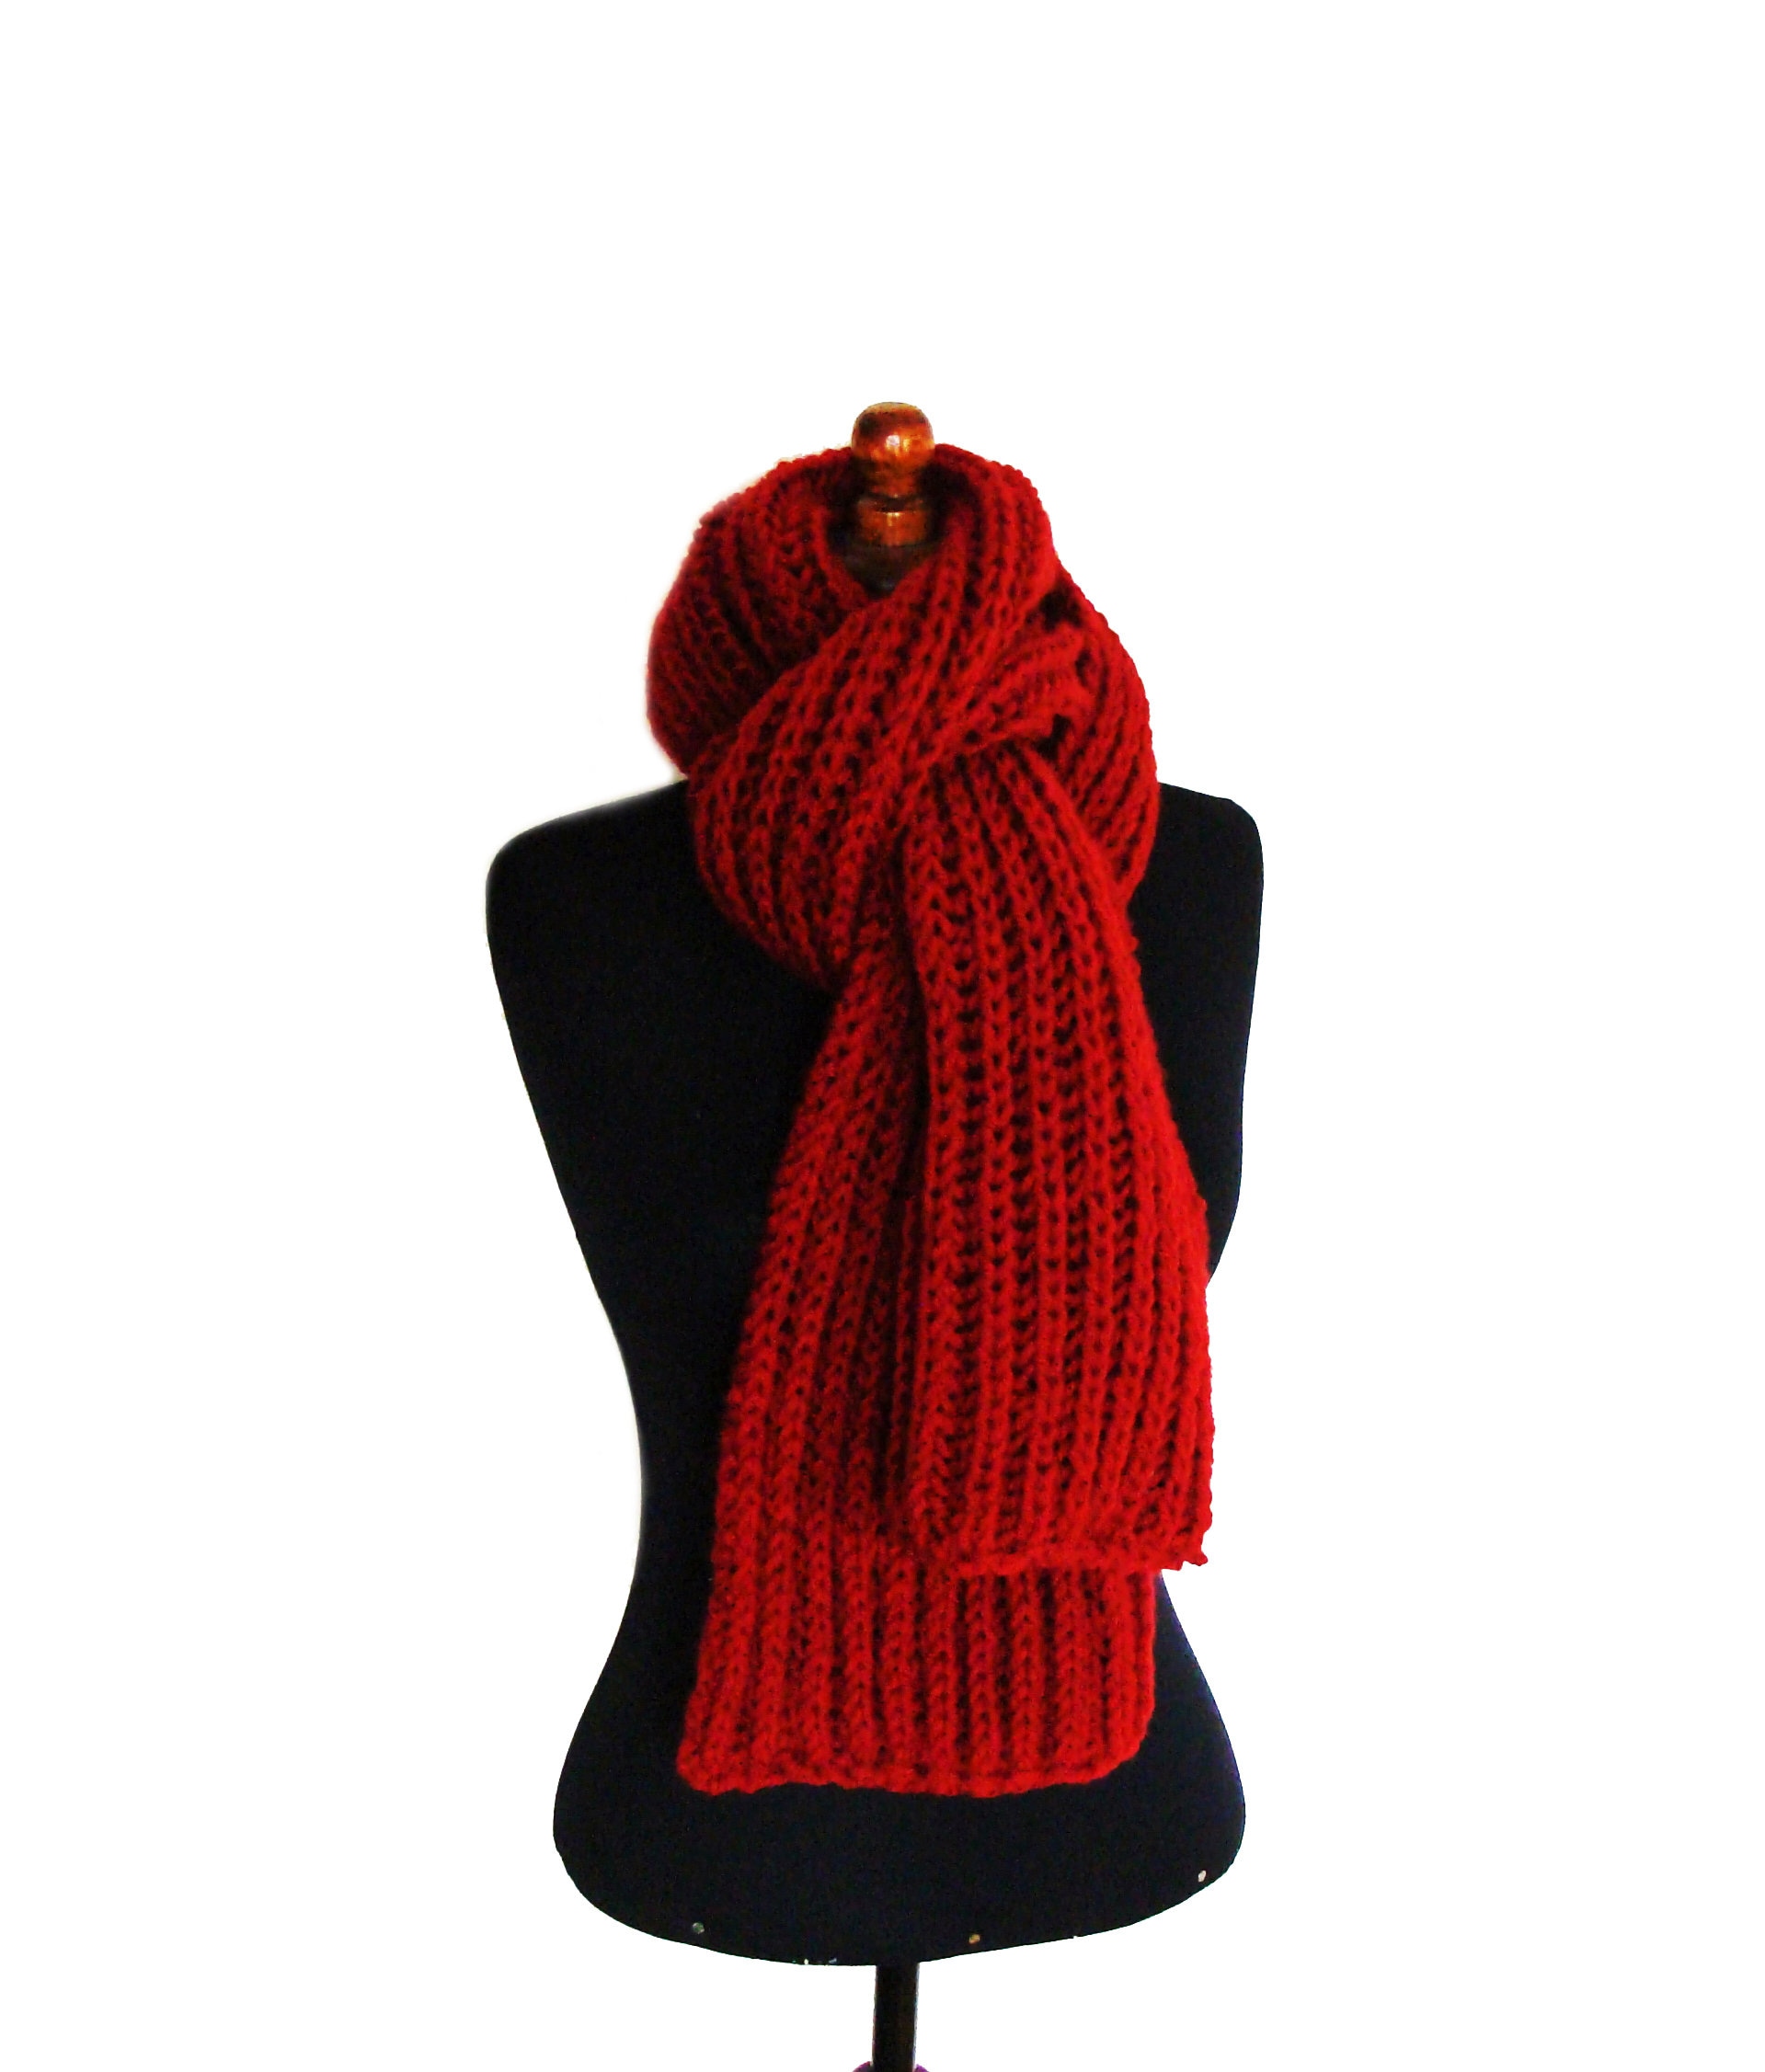 Hand-knitted Red Scarf Made of High Quality Wool